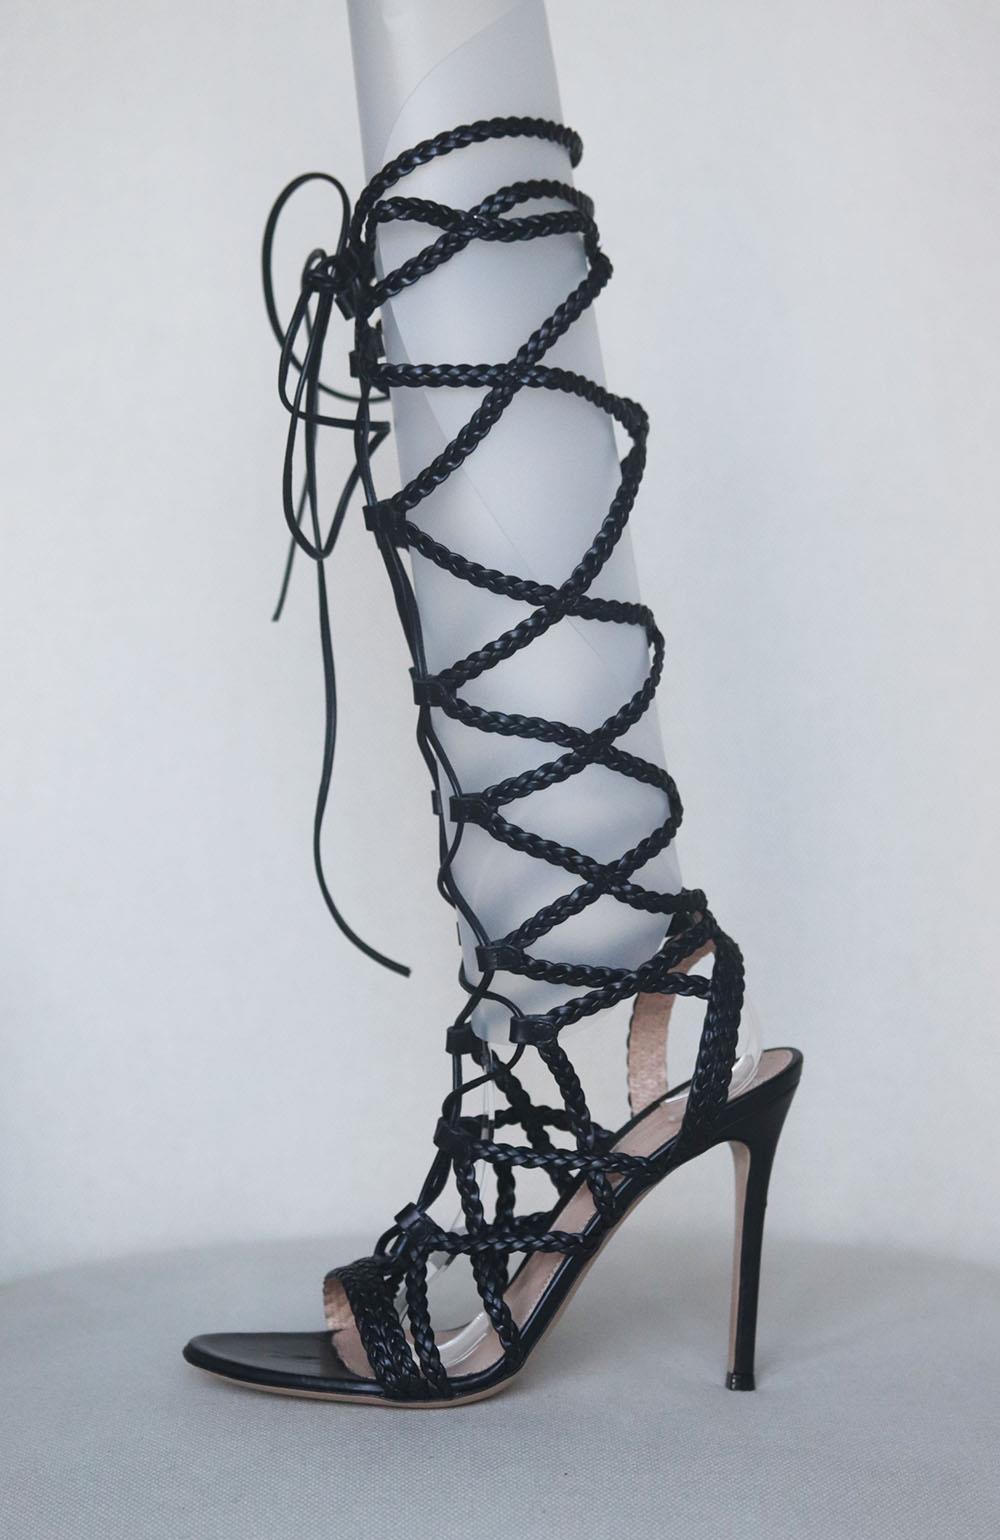 Gianvito Rossi's gladiator-inspired sandals are a key style to own this season, this knee-high pair is crafted from supple leather and has thin braided straps that lace-up along the front, allowing you to customize the fit. Heel measures